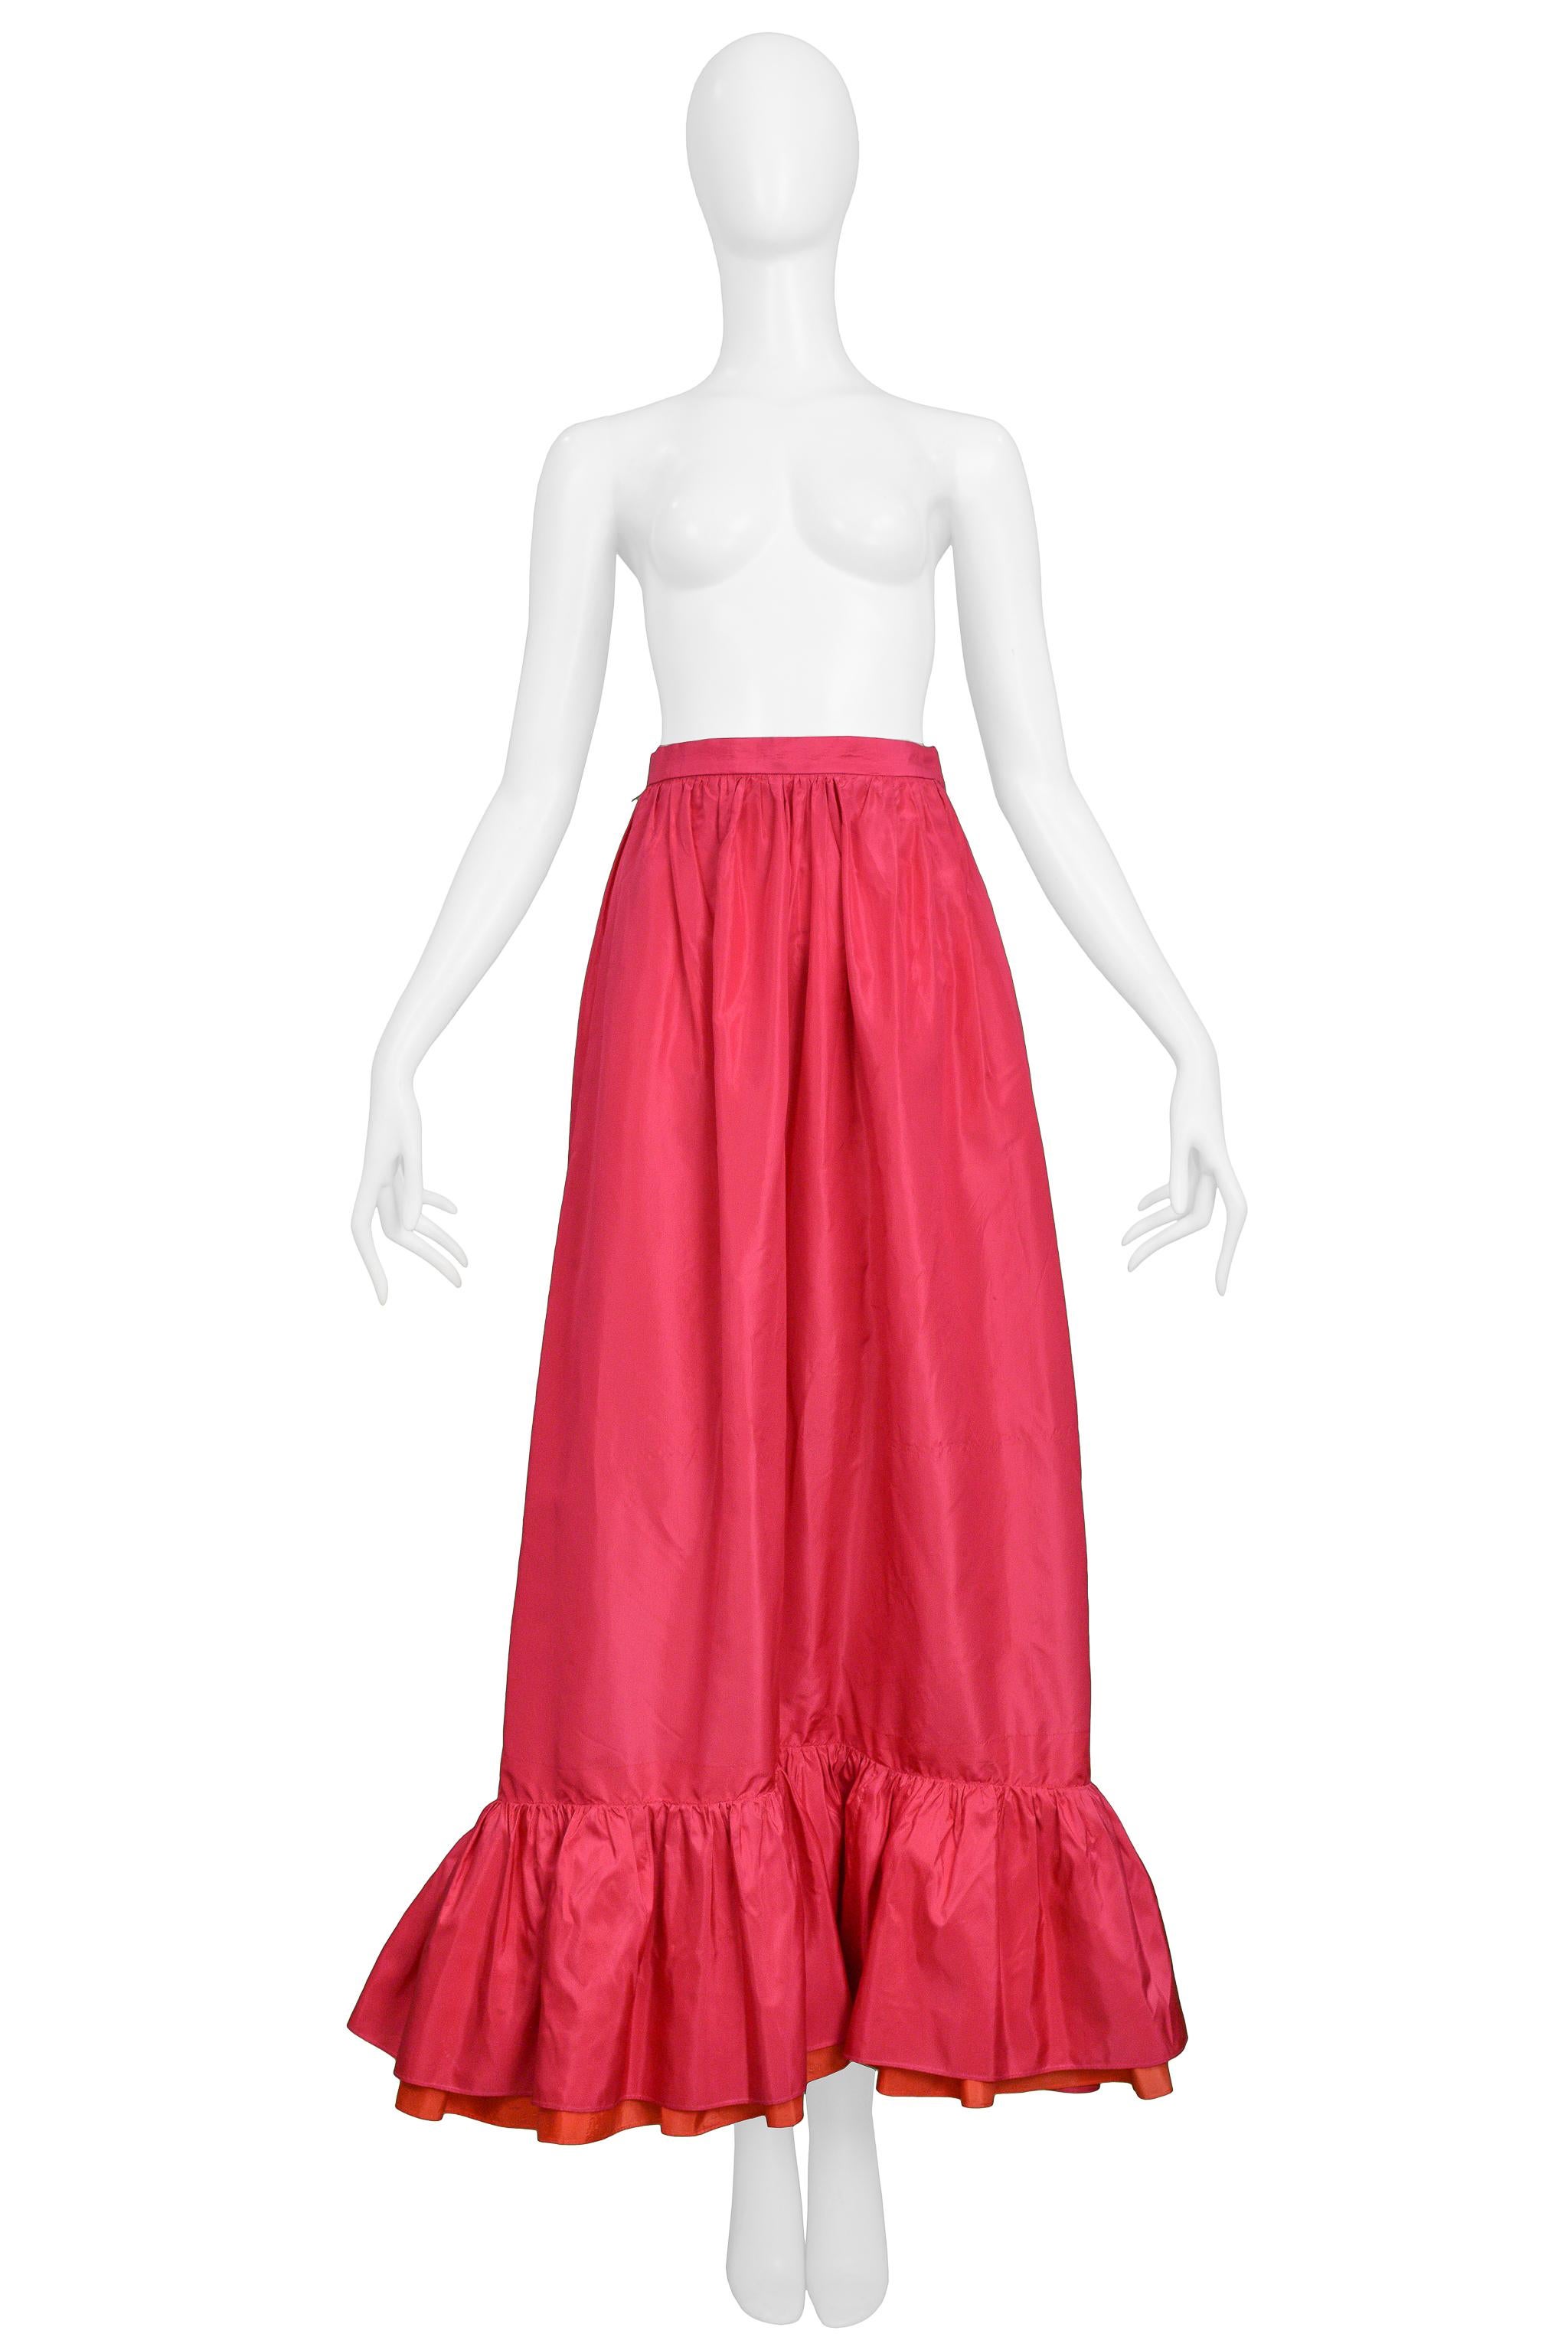 Resurrection Vintage is excited to offer a vintage Yves Saint Laurent silk taffeta maxi skirt featuring a high wasitband, gathered skirt, and pink and red-orange ruffle hem.

Yves Saint Laurent
Size 40
Silk
Good Vintage Condition
Authenticity